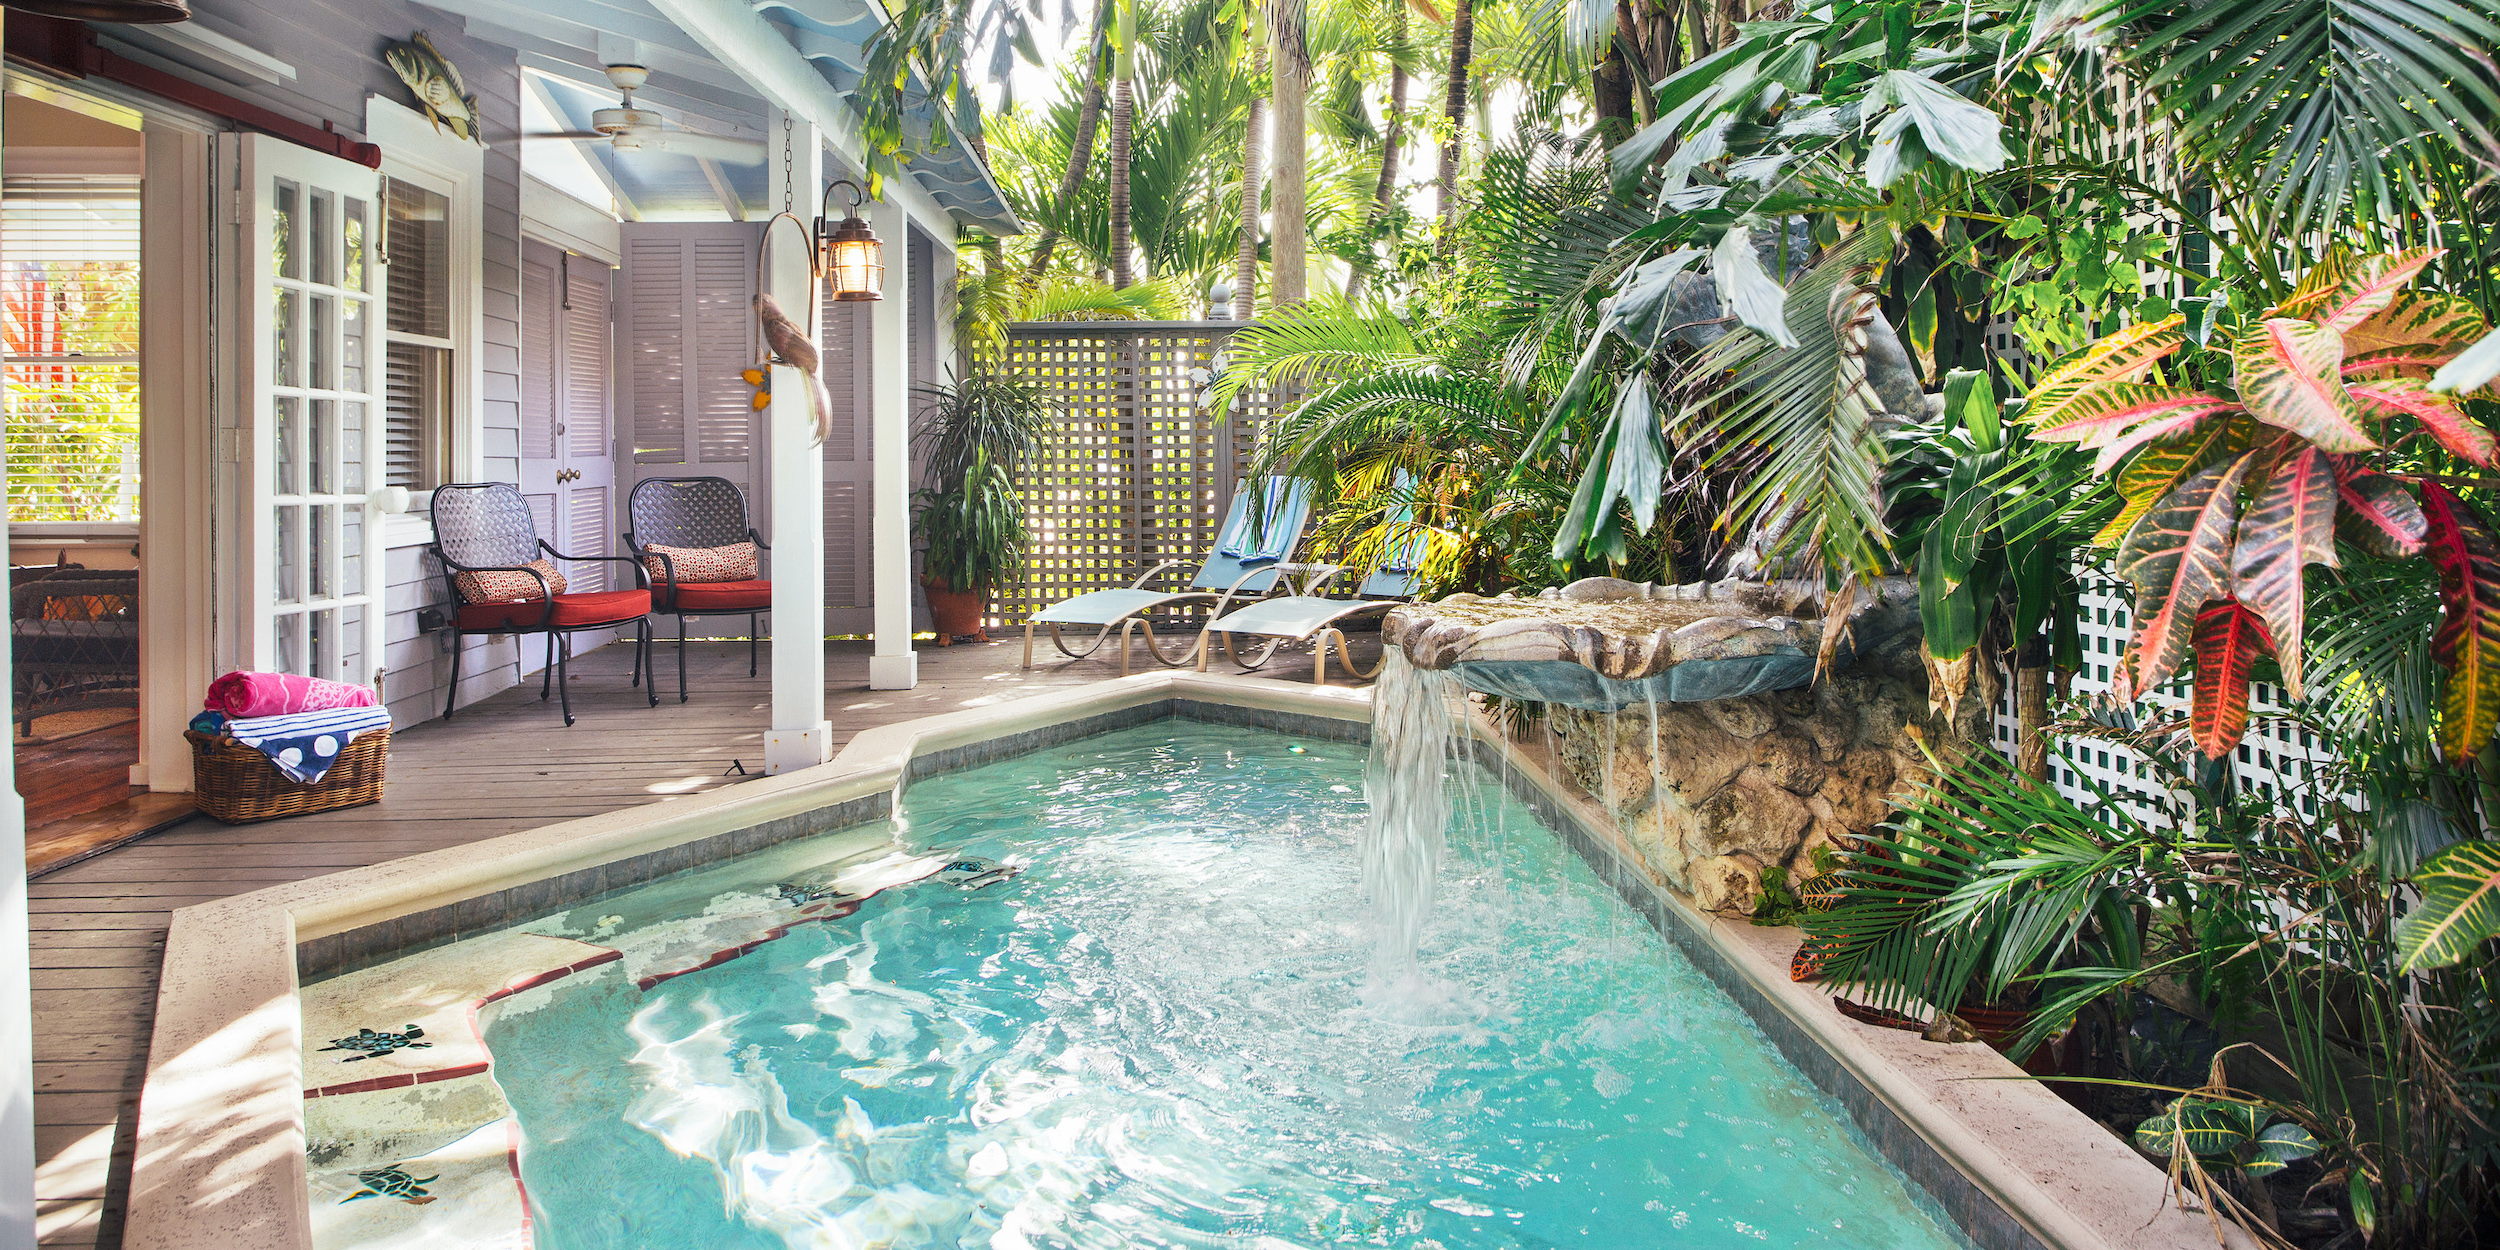 Monthly Florida vacation rentals - find a perfect short-term